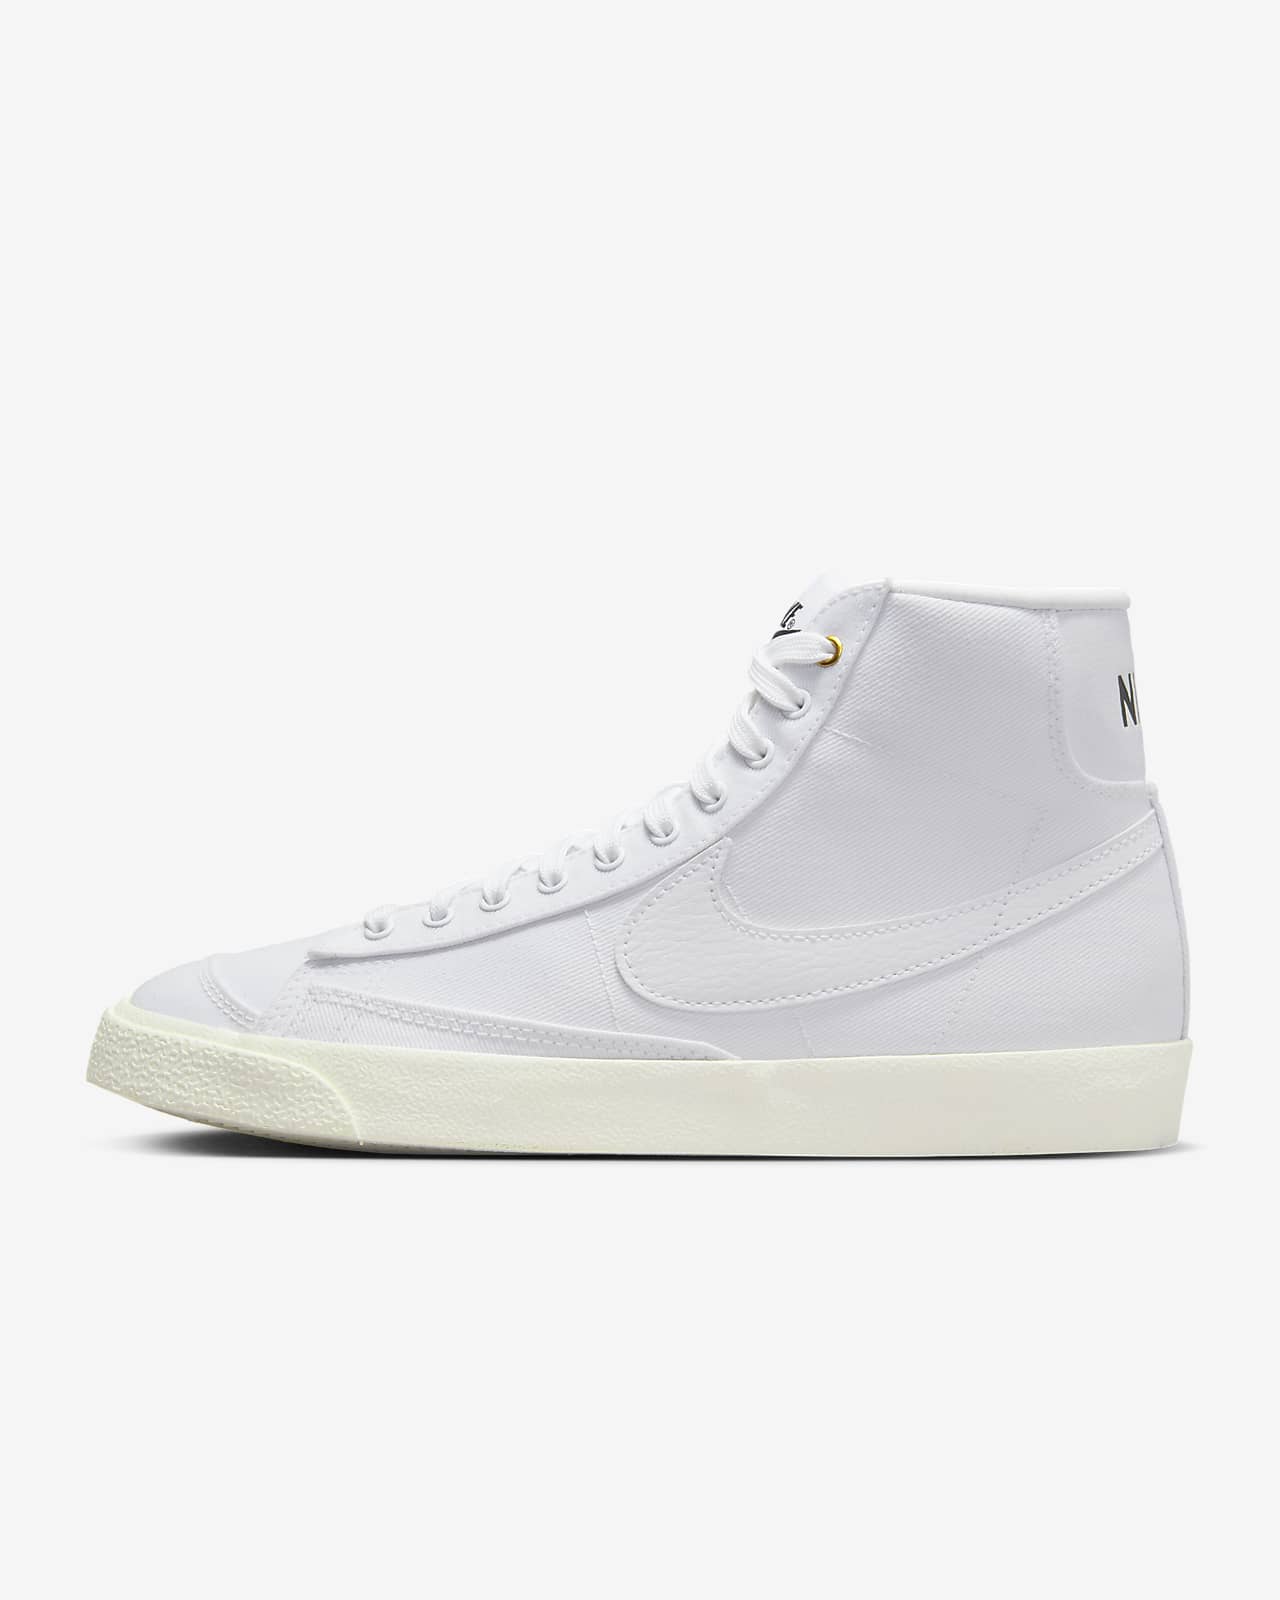 Nike Blazer Mid 77 Canvas Womens Shoes Review